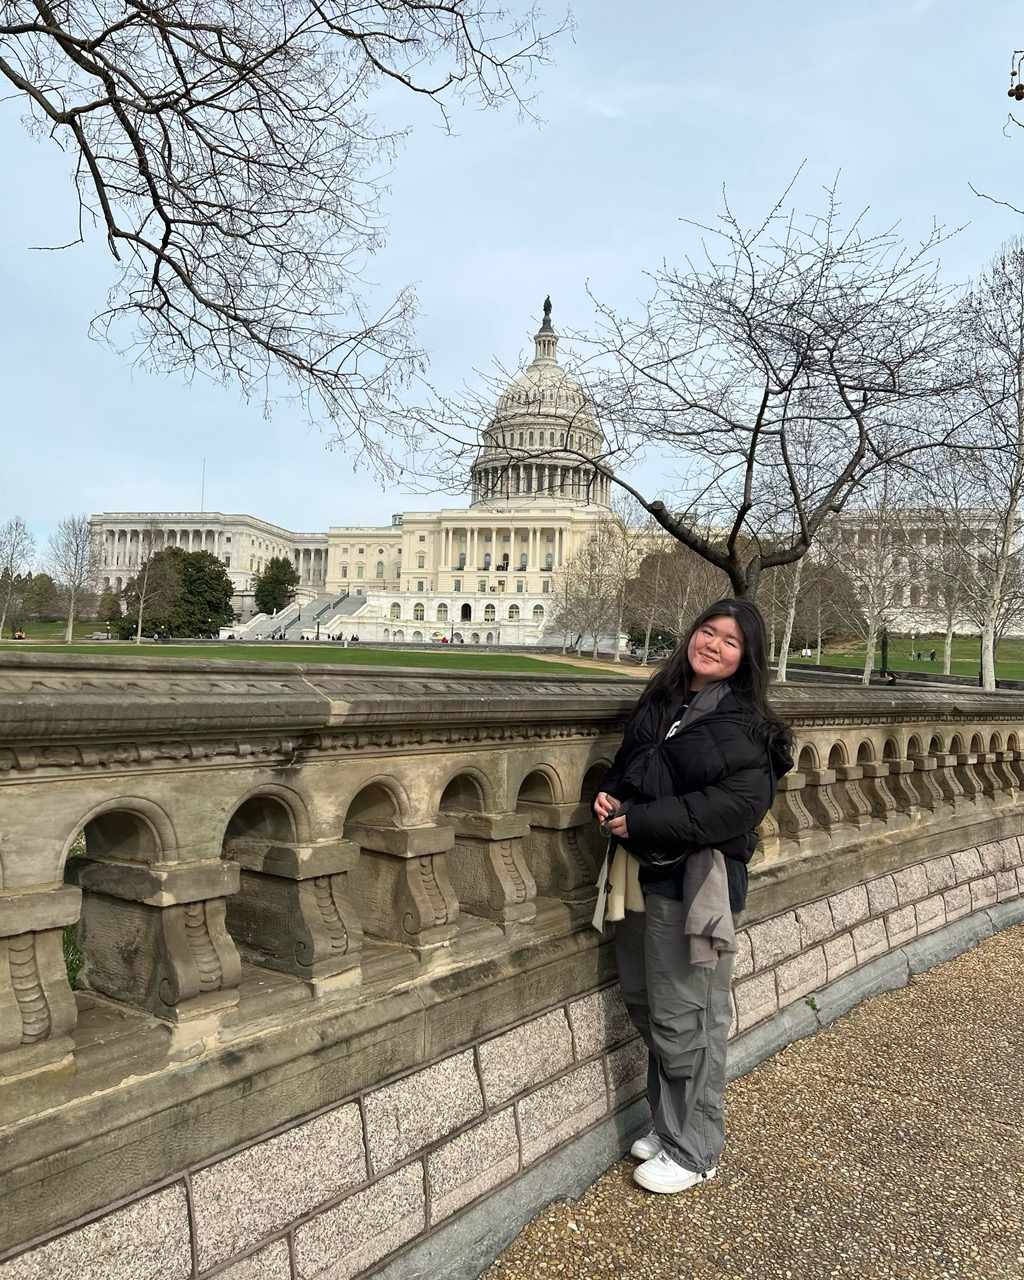 Senior Audrey Hartono poses for a picture Feb. 27, while sightseeing at the U.S. Capitol Building. Hartono said the Career Trek has helped her consider D.C. as a future place to work. Photo courtesy of Audrey Hartono